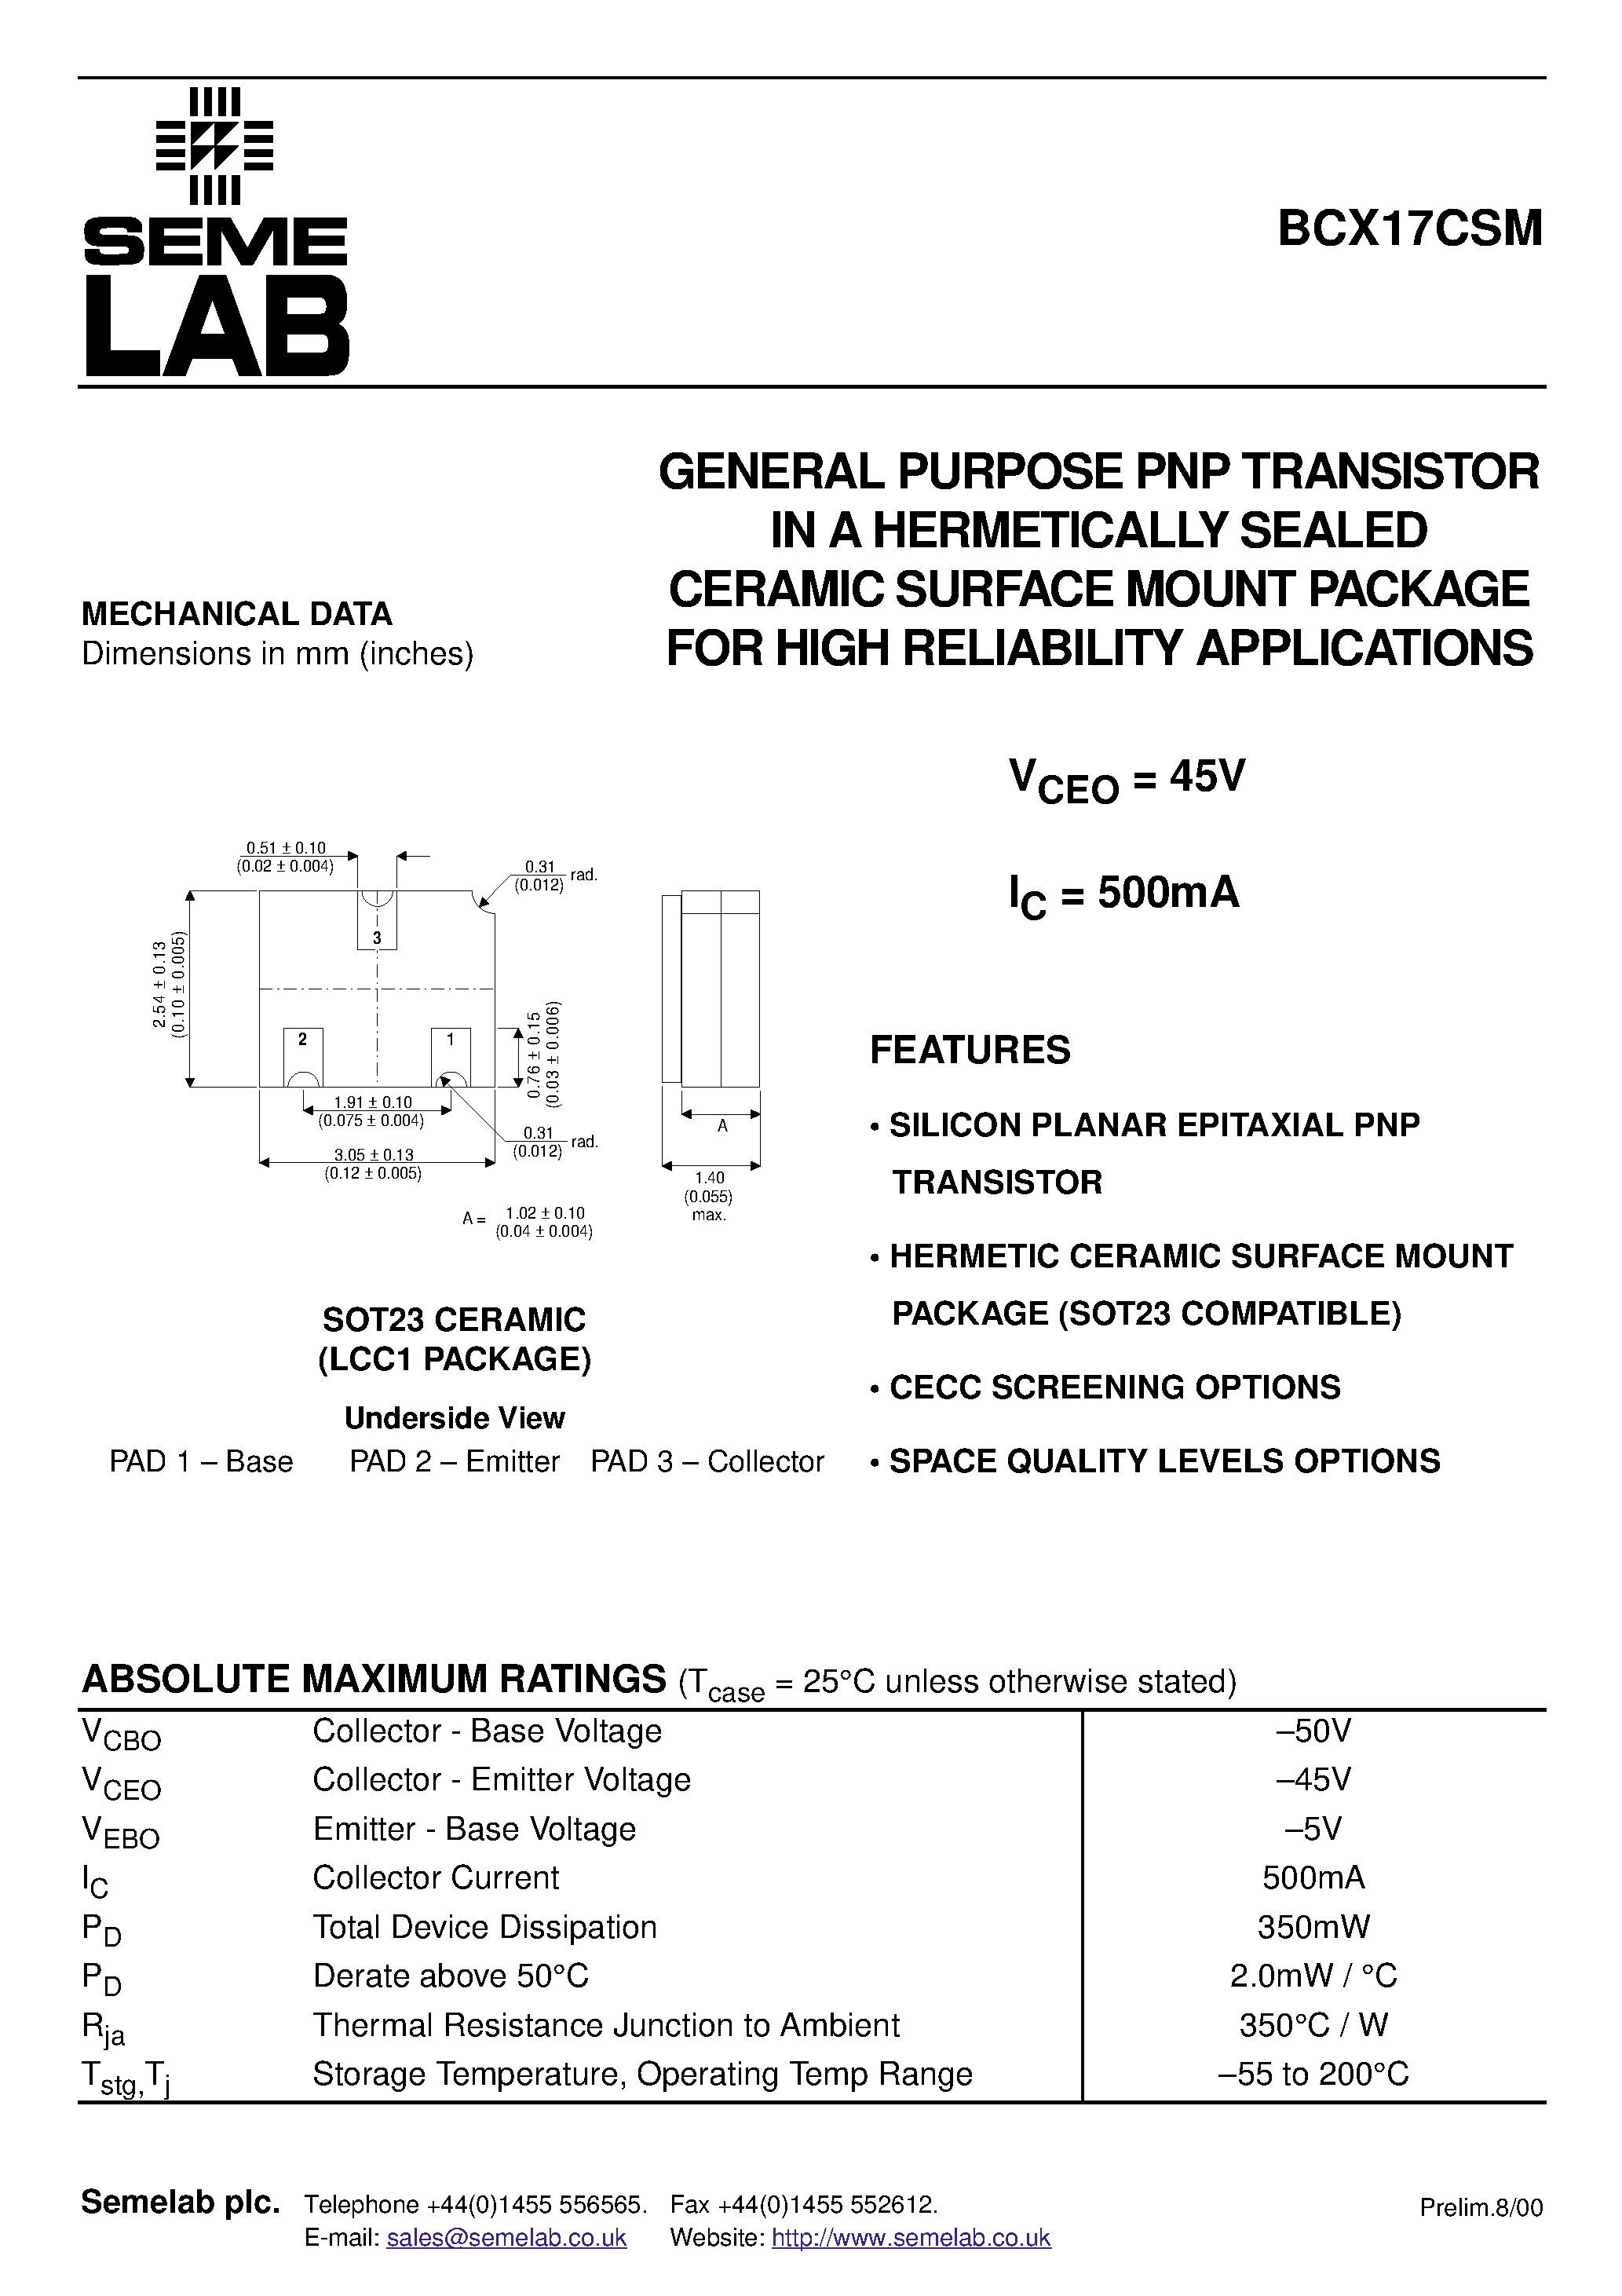 Datasheet BCX17CSM - GENERAL PURPOSE PNP TRANSISTOR IN A HERMETICALLY SEALED CERAMIC SURFACE MOUNT PACKAGE FOR HIGH RELIABILITY APPLICATIONS page 1